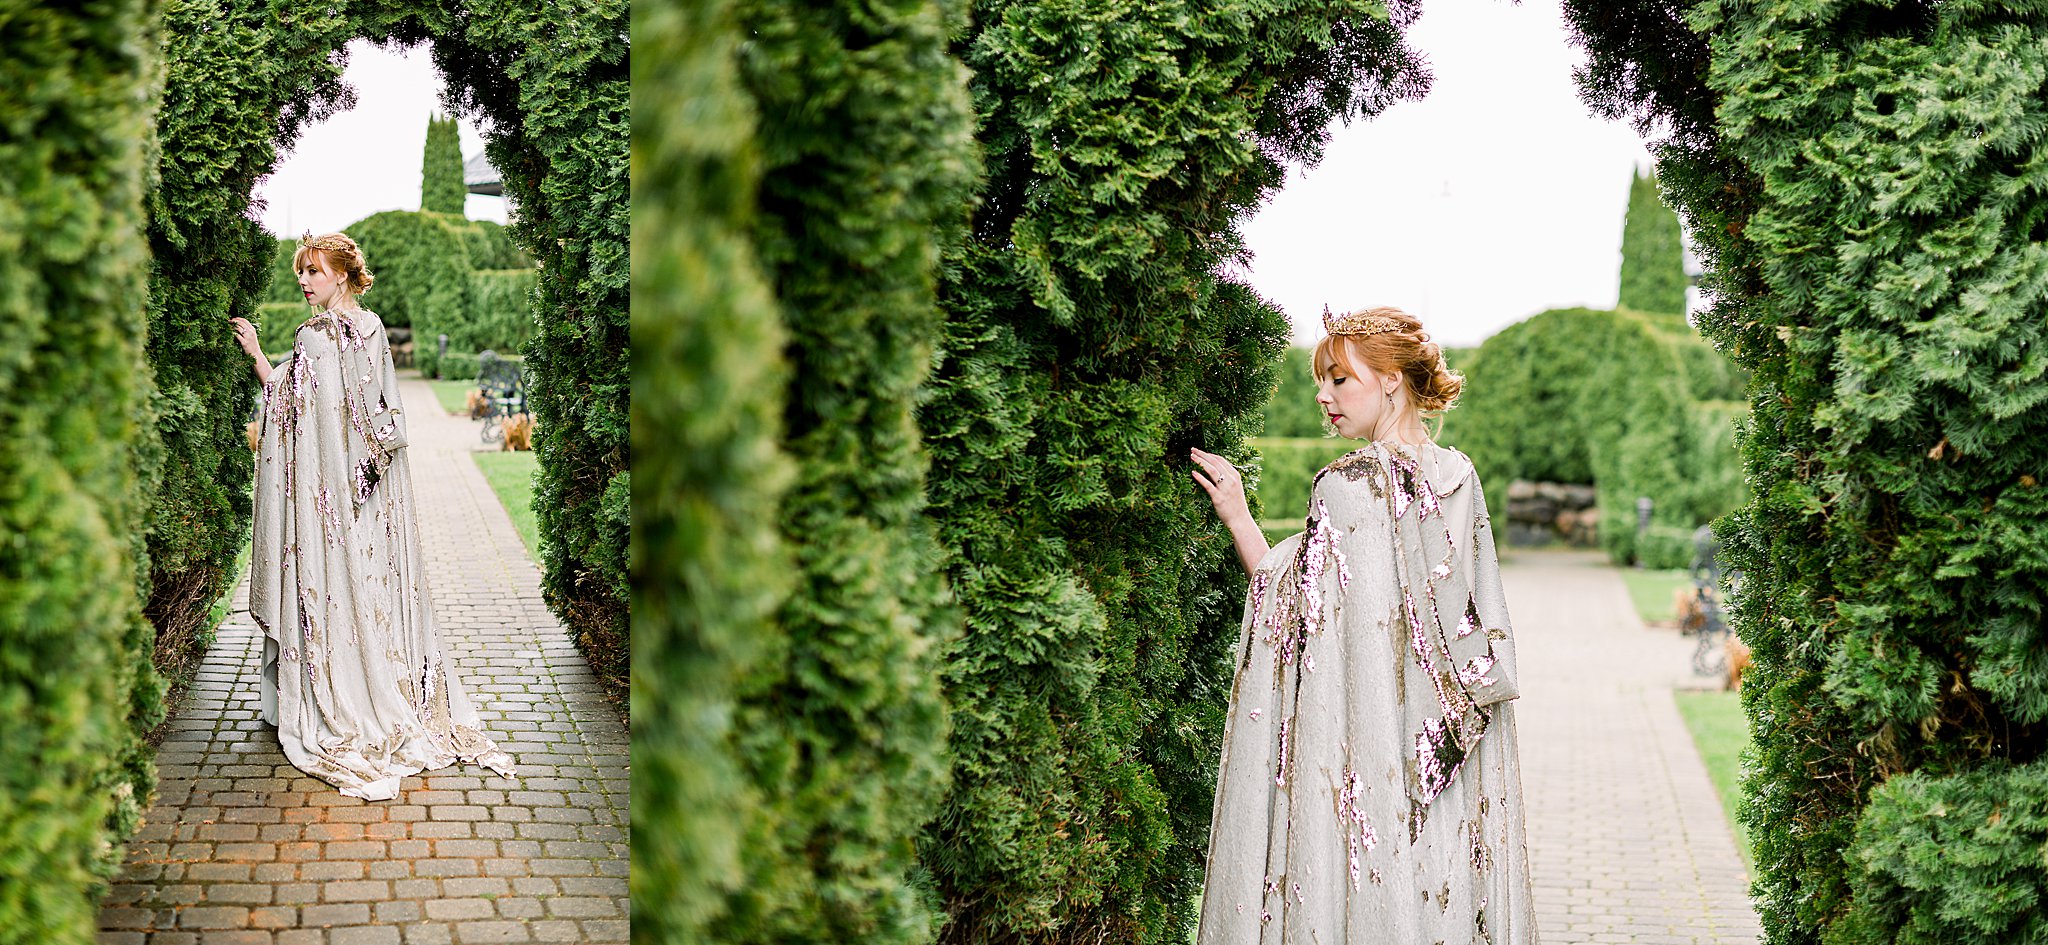 Bride explores hedges for Game of Thrones wedding in Butterfly Garden at Castle Farms in Charlevoix, Michigan.